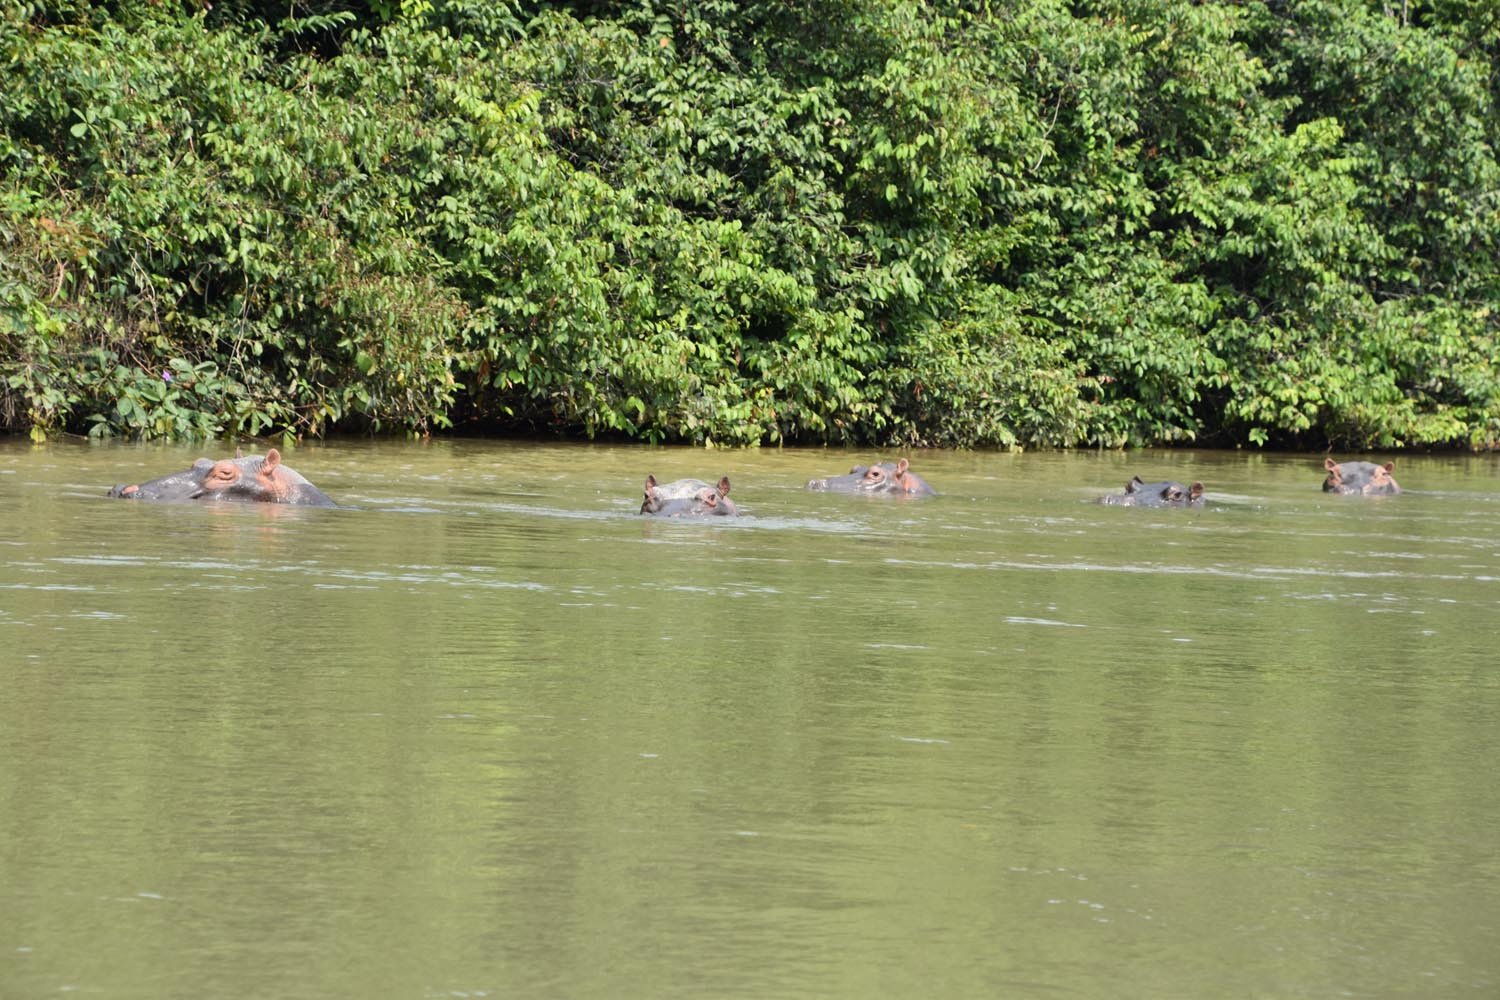 Hippos are now seen in larger numbers in the rivers of Lésio-Louna reserve